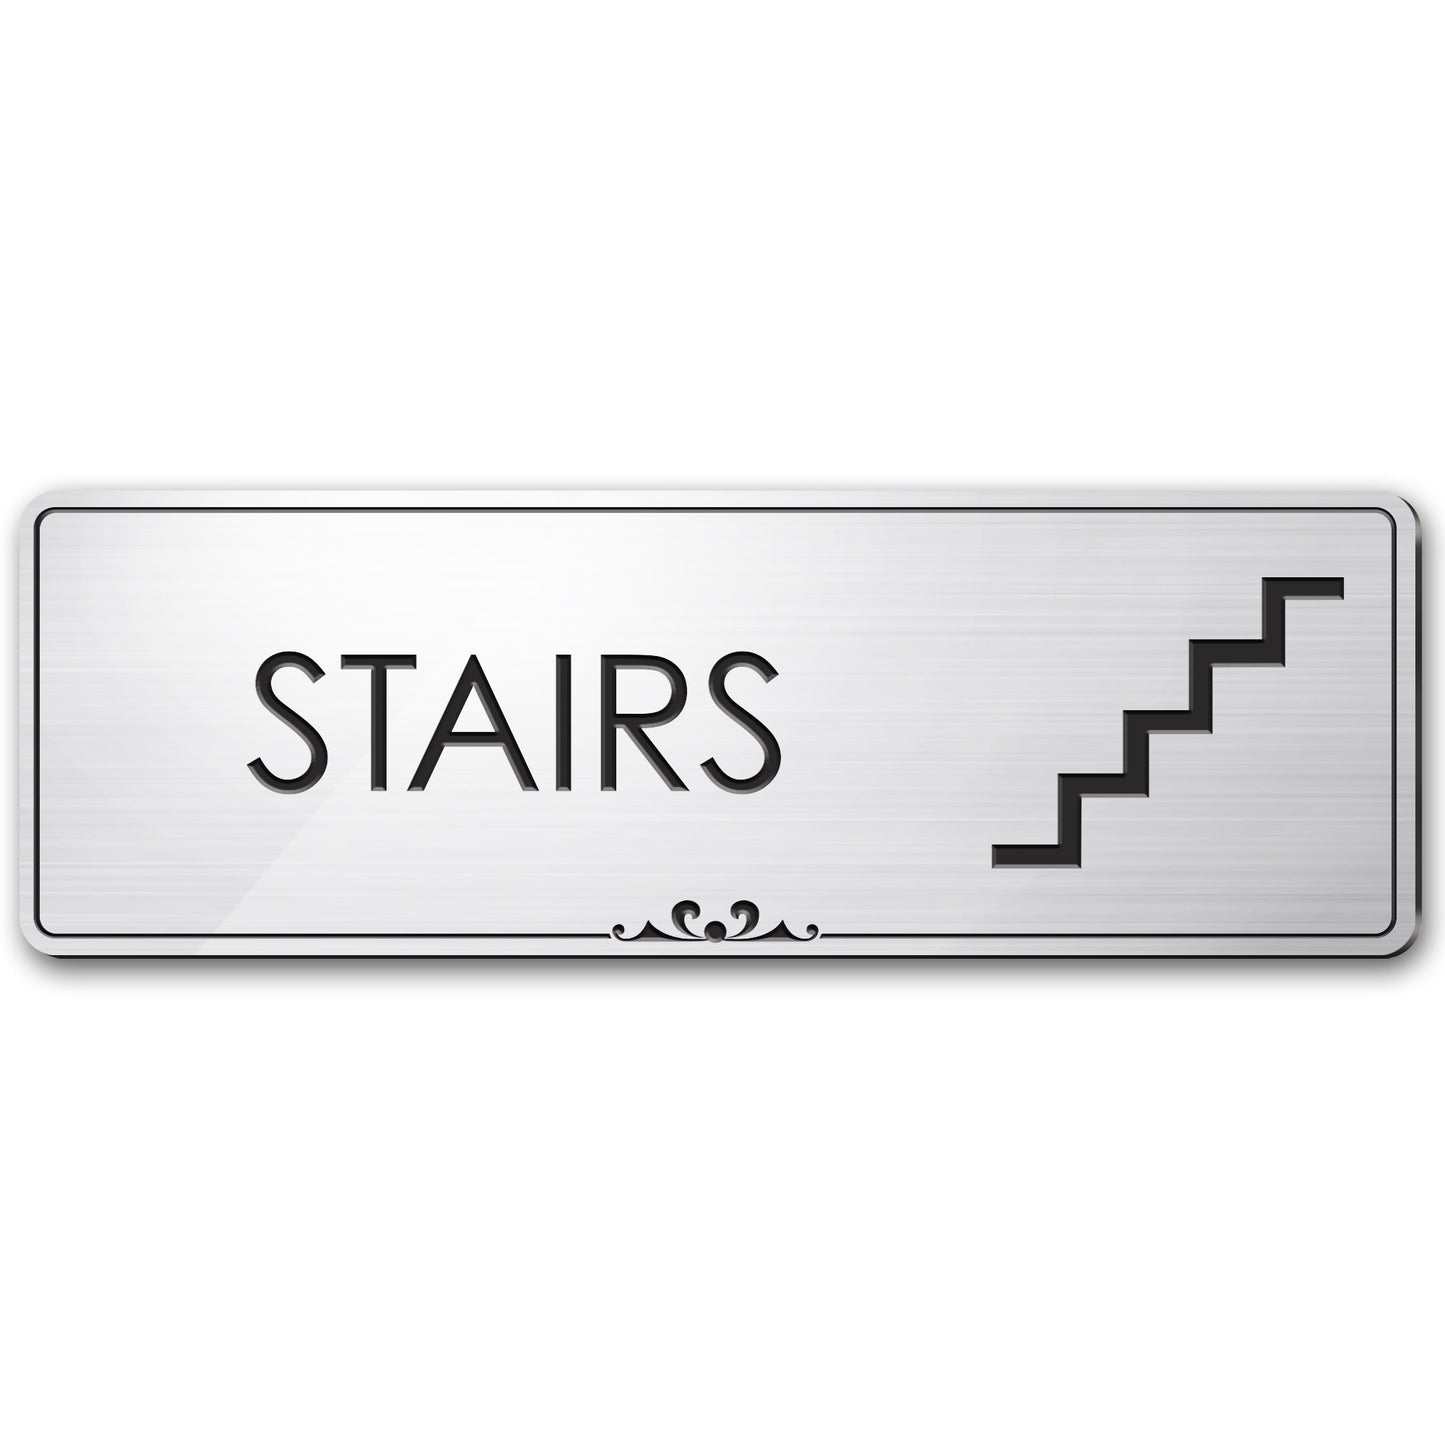 Stairs Door Sign Stairway Sign for Business